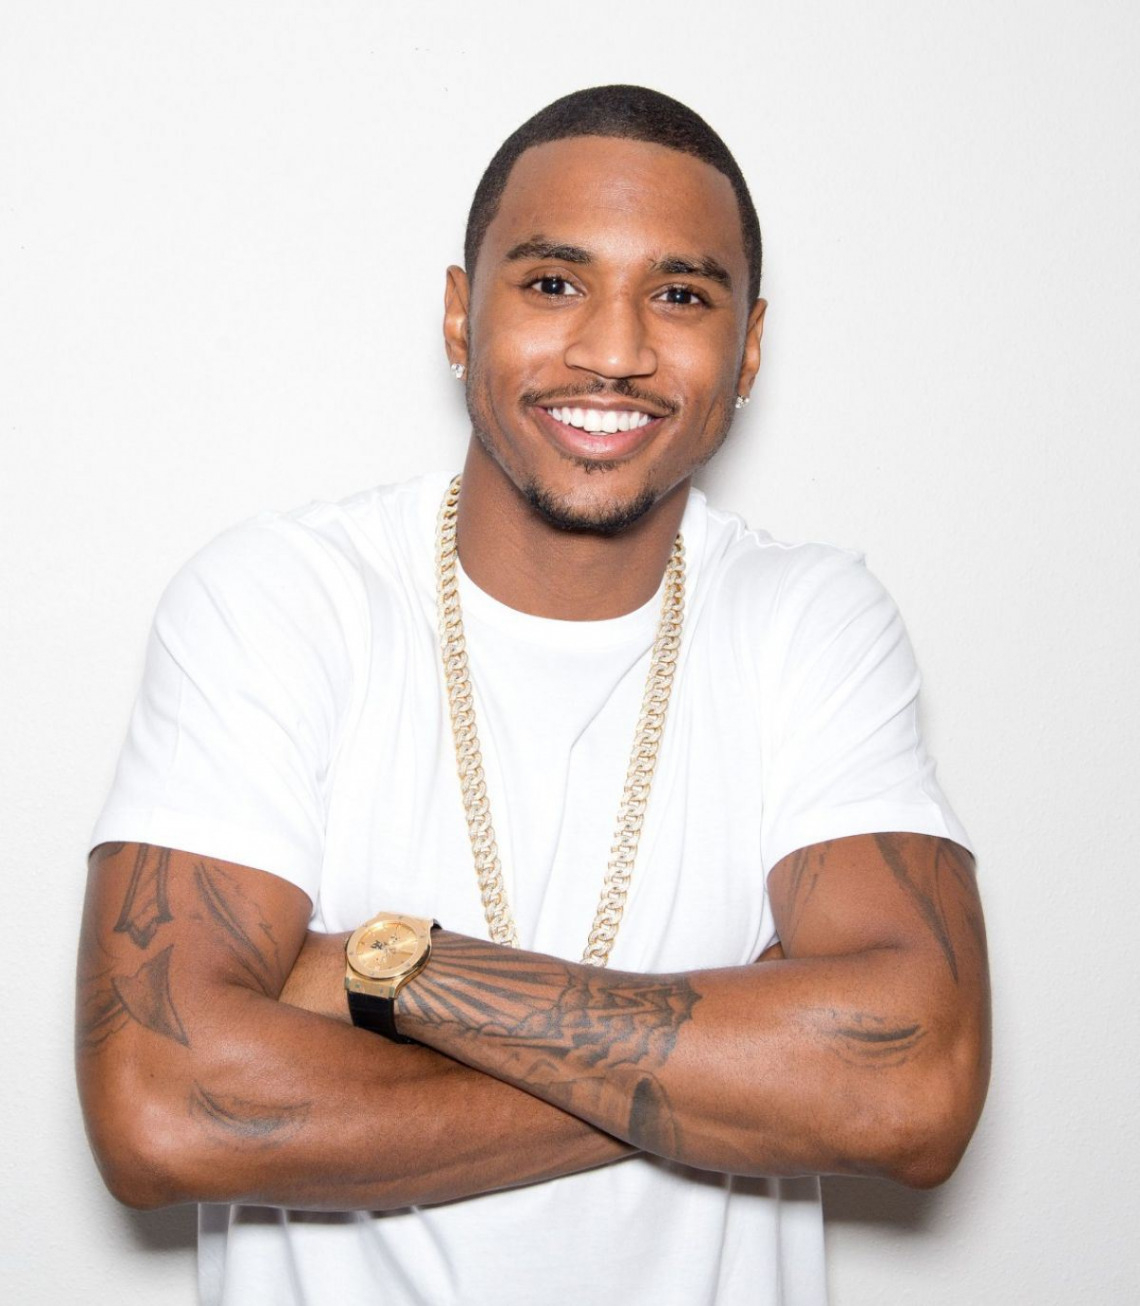 Top Trey Songz Wrist Tattoo Designs Ideas T9b Y4j intended for measurements 1140 X 1306